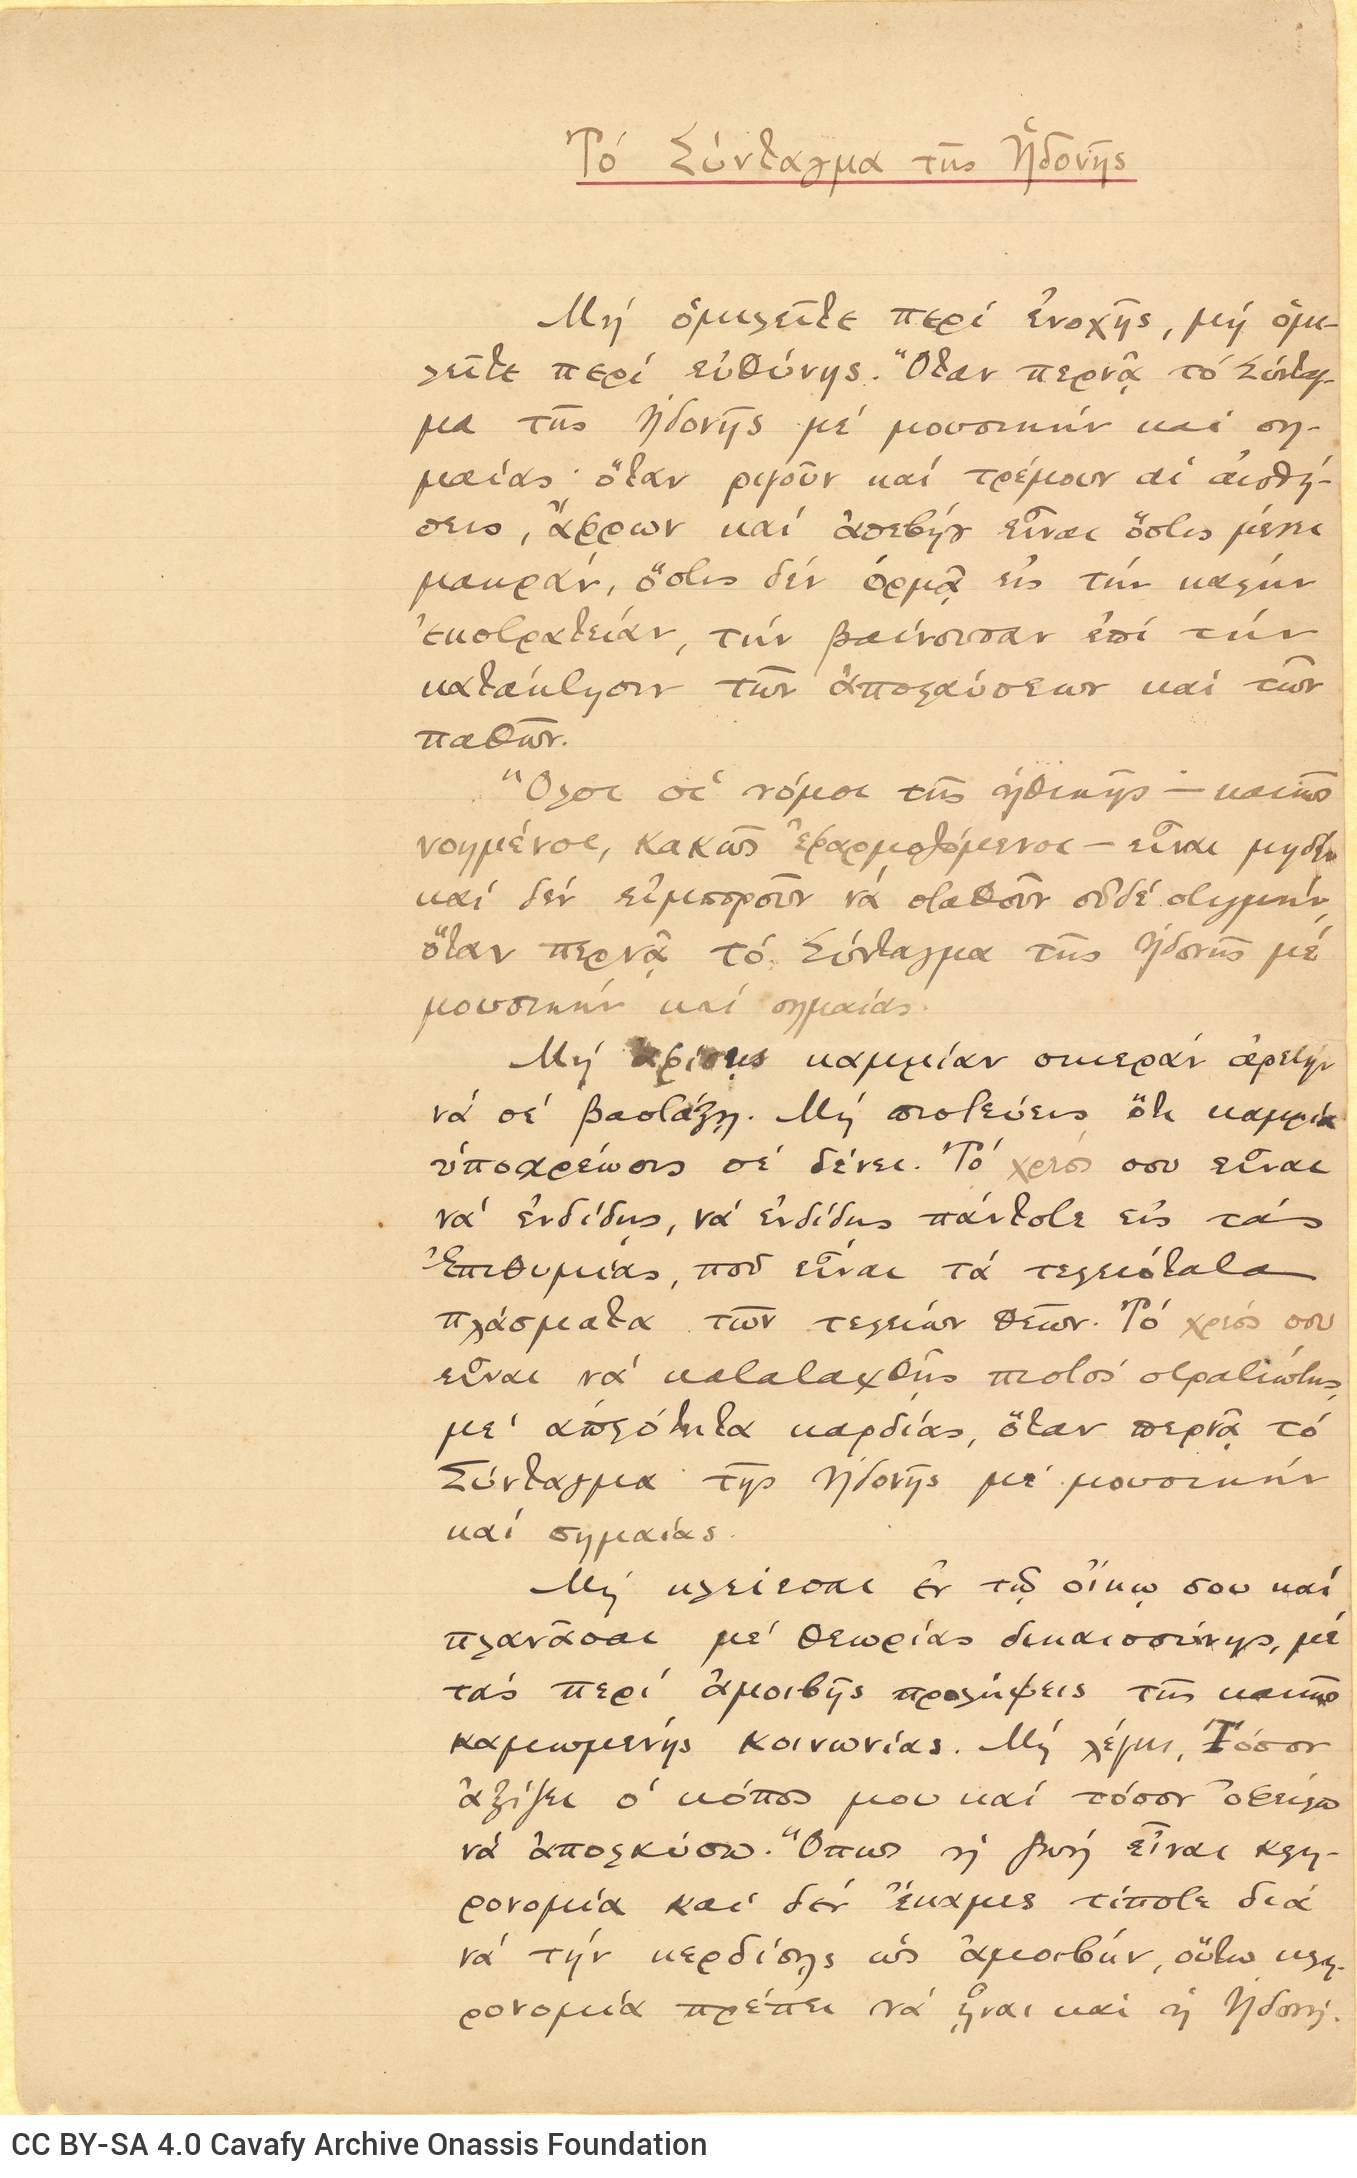 Handwritten prose text ("The Pleasure Brigade") in ink on both sides of a ruled sheet. Notes in pencil at the bottom of th